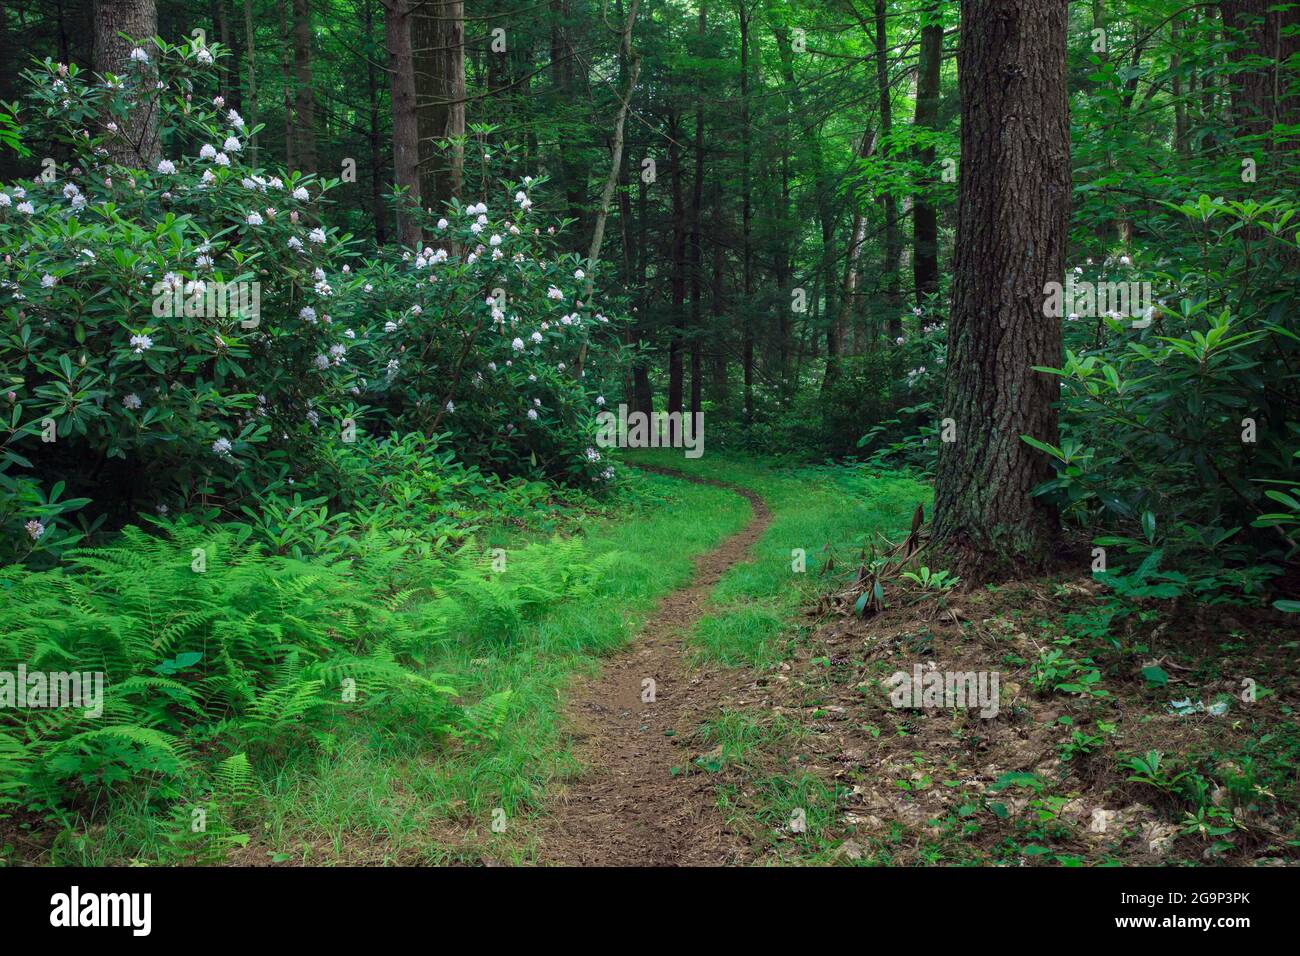 A trail through the Delaware State Forest in July during the blooming of rhododendron in Pennsylvania's Pocono Mountains. Stock Photo